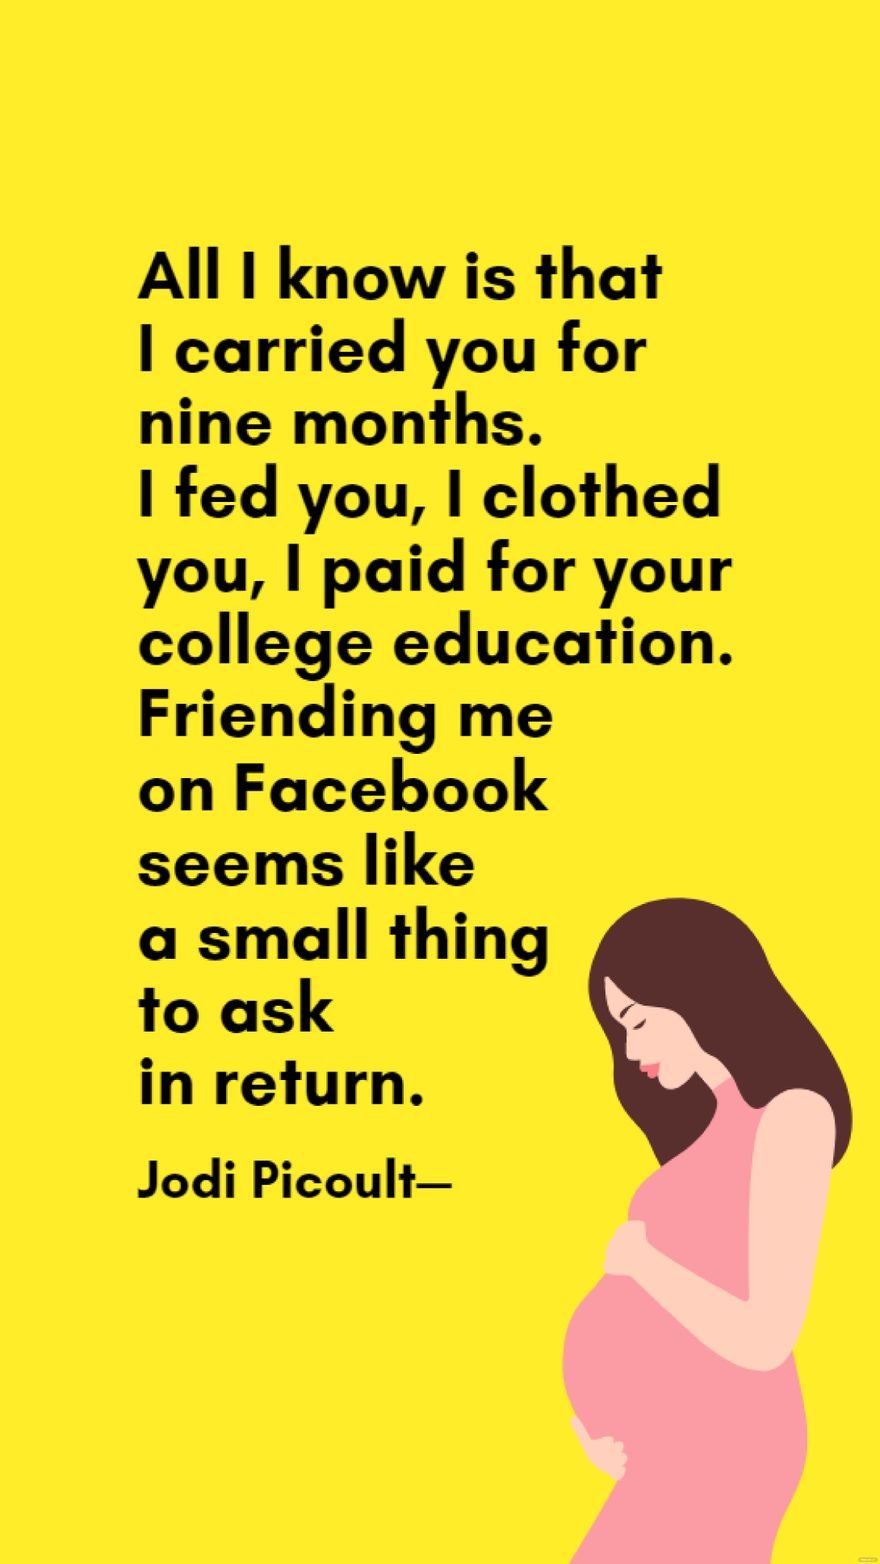 Free Jodi Picoult - All I know is that I carried you for nine months. I fed you, I clothed you, I paid for your college education. Friending me on Facebook seems like a small thing to ask in return. in JPG